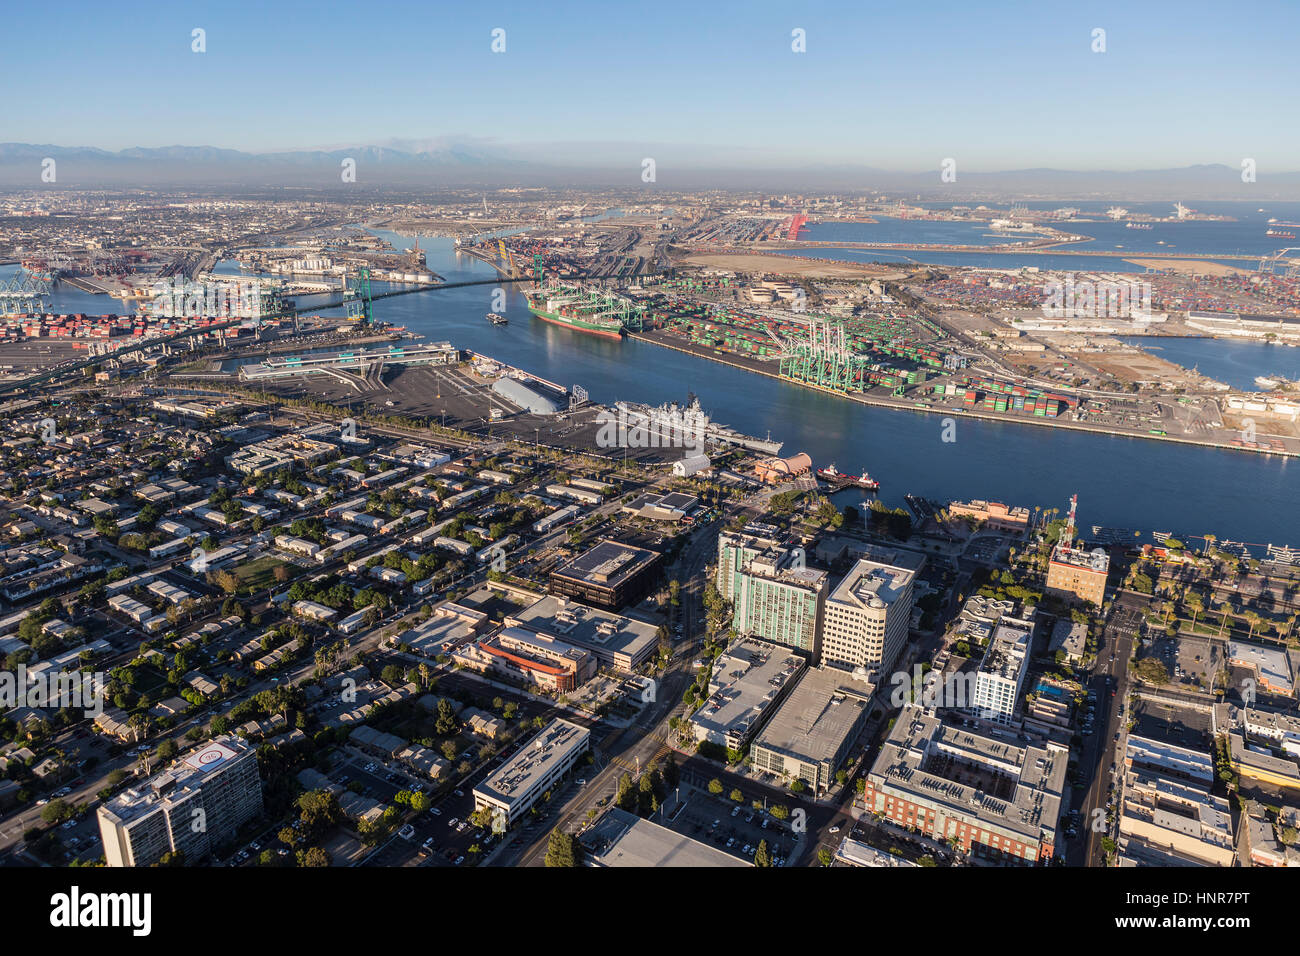 Los Angeles, California, USA - August 16, 2016:  Aerial view of San Pedro and the Los Angeles Harbor main channel. Stock Photo